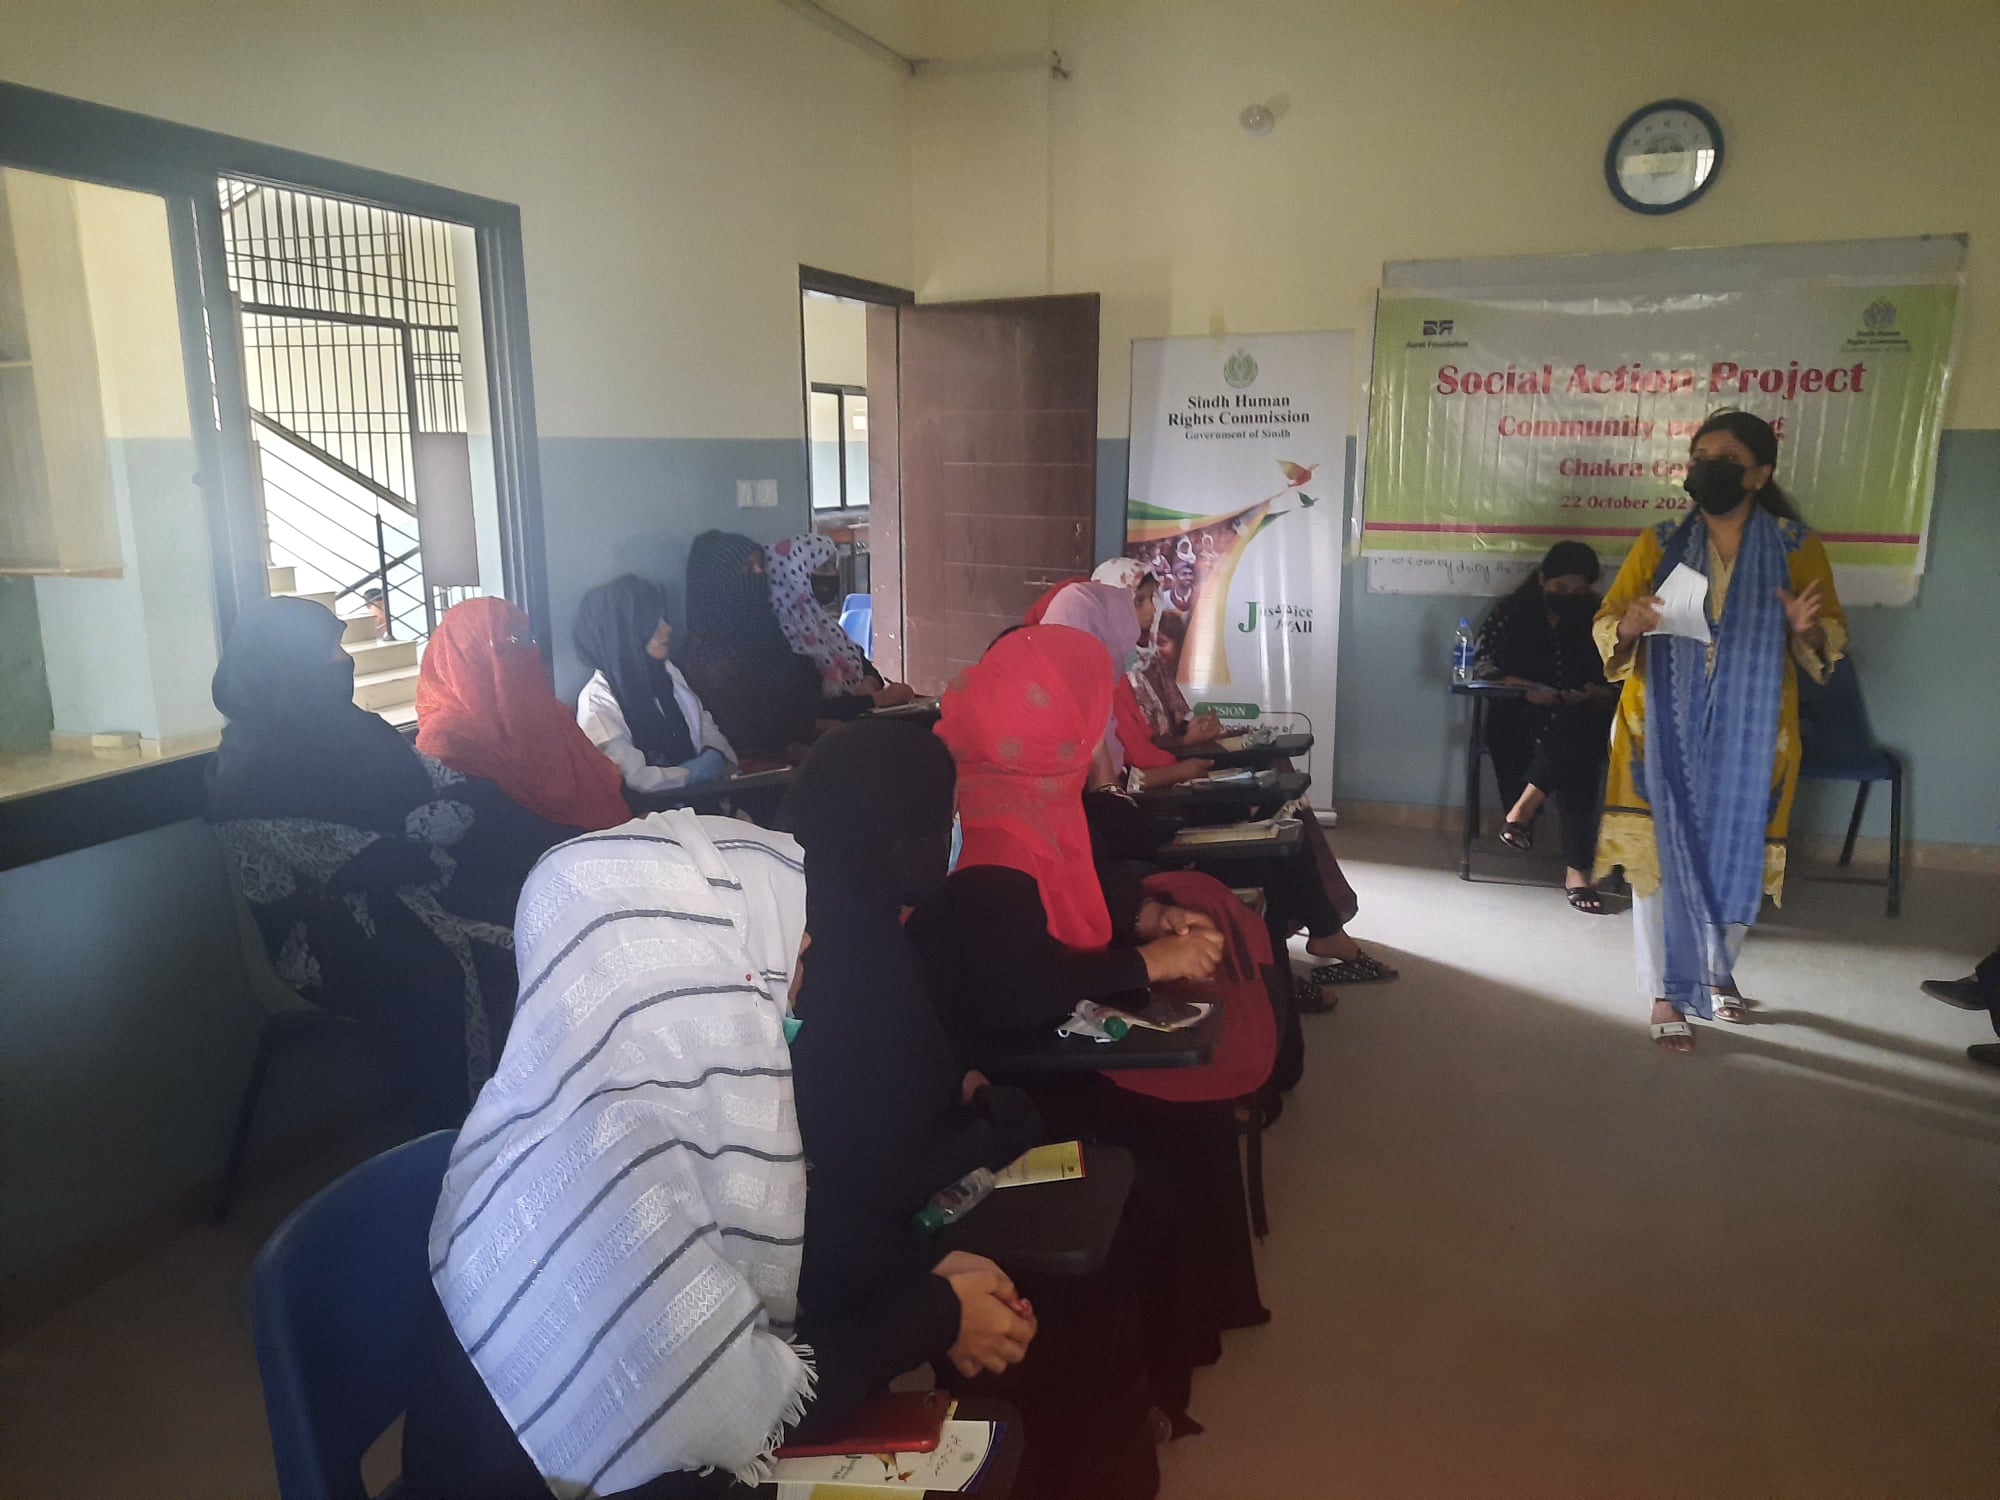 SHRC conducted Community Sessions